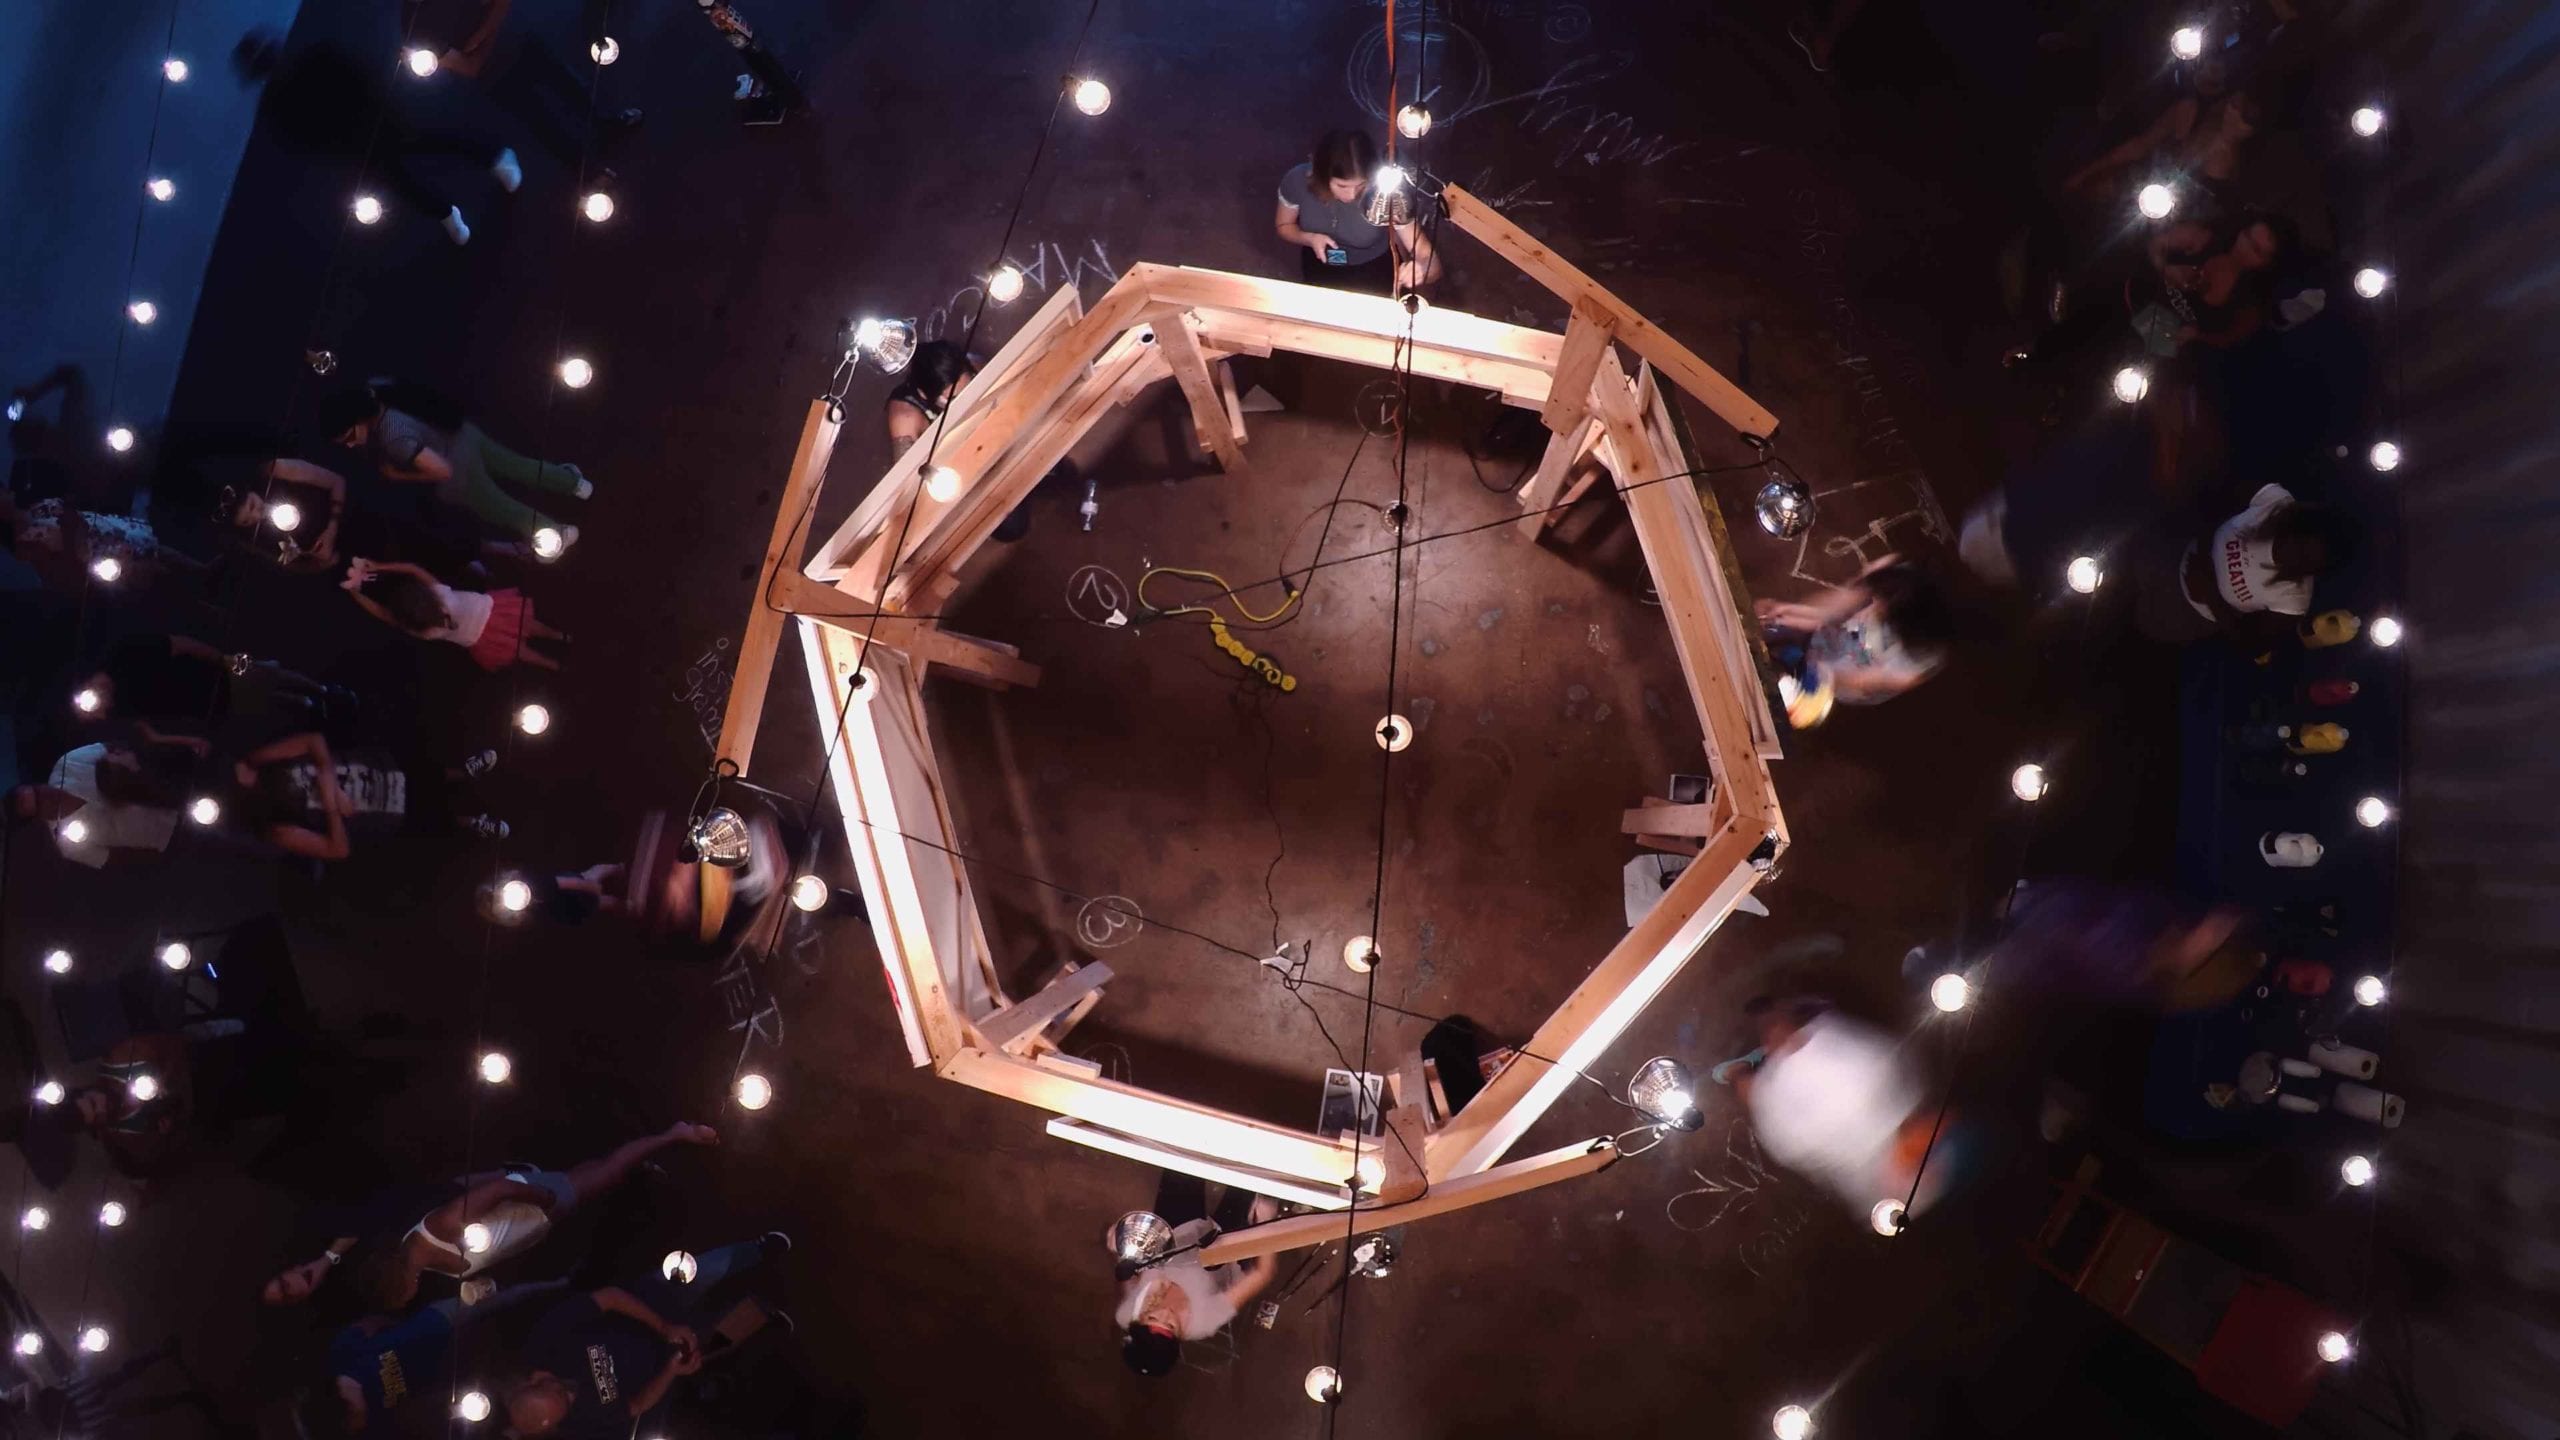 Overhead view of a set with lights and people